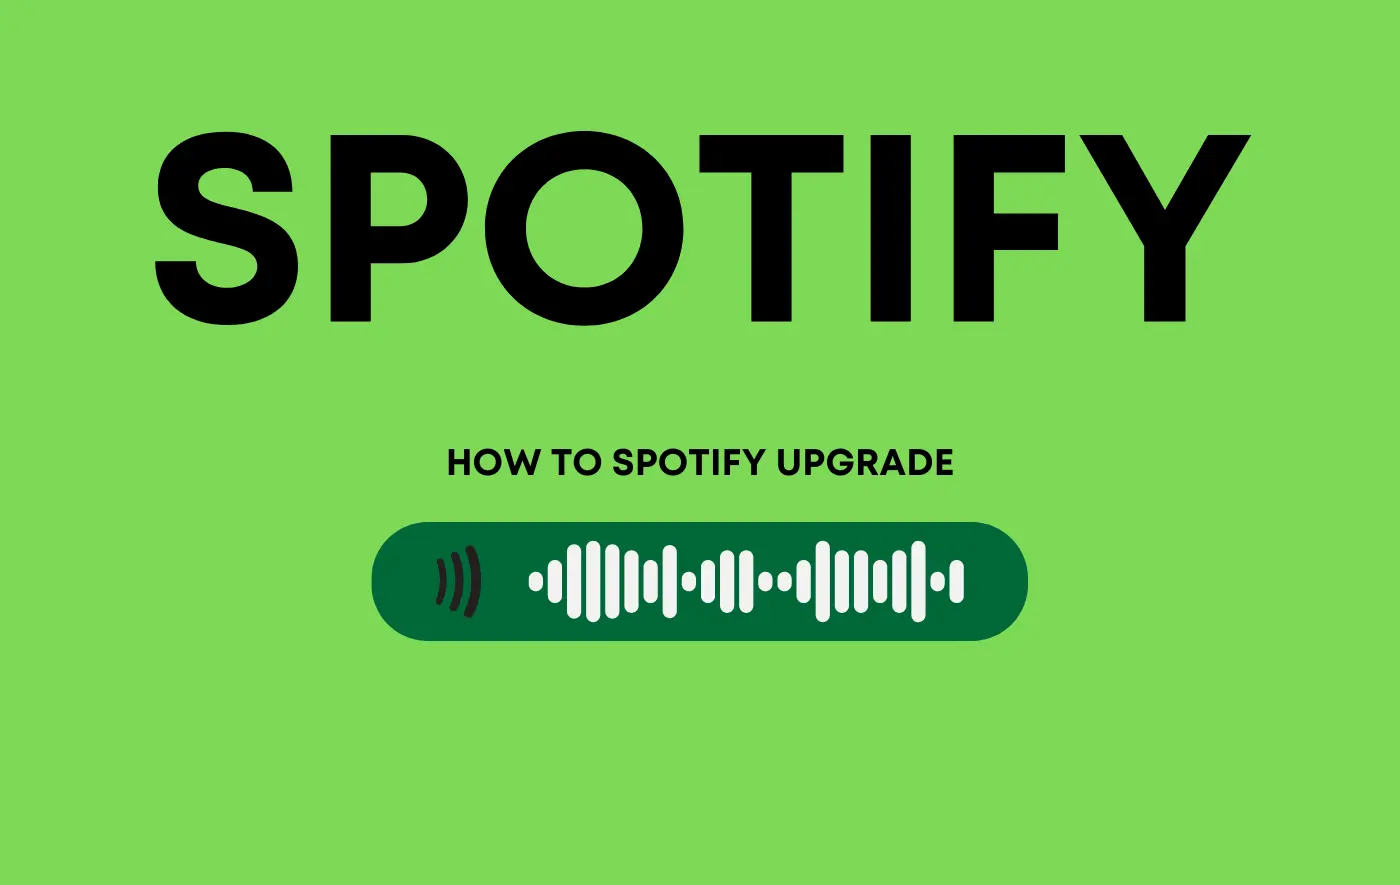 How to Spotify Upgrader